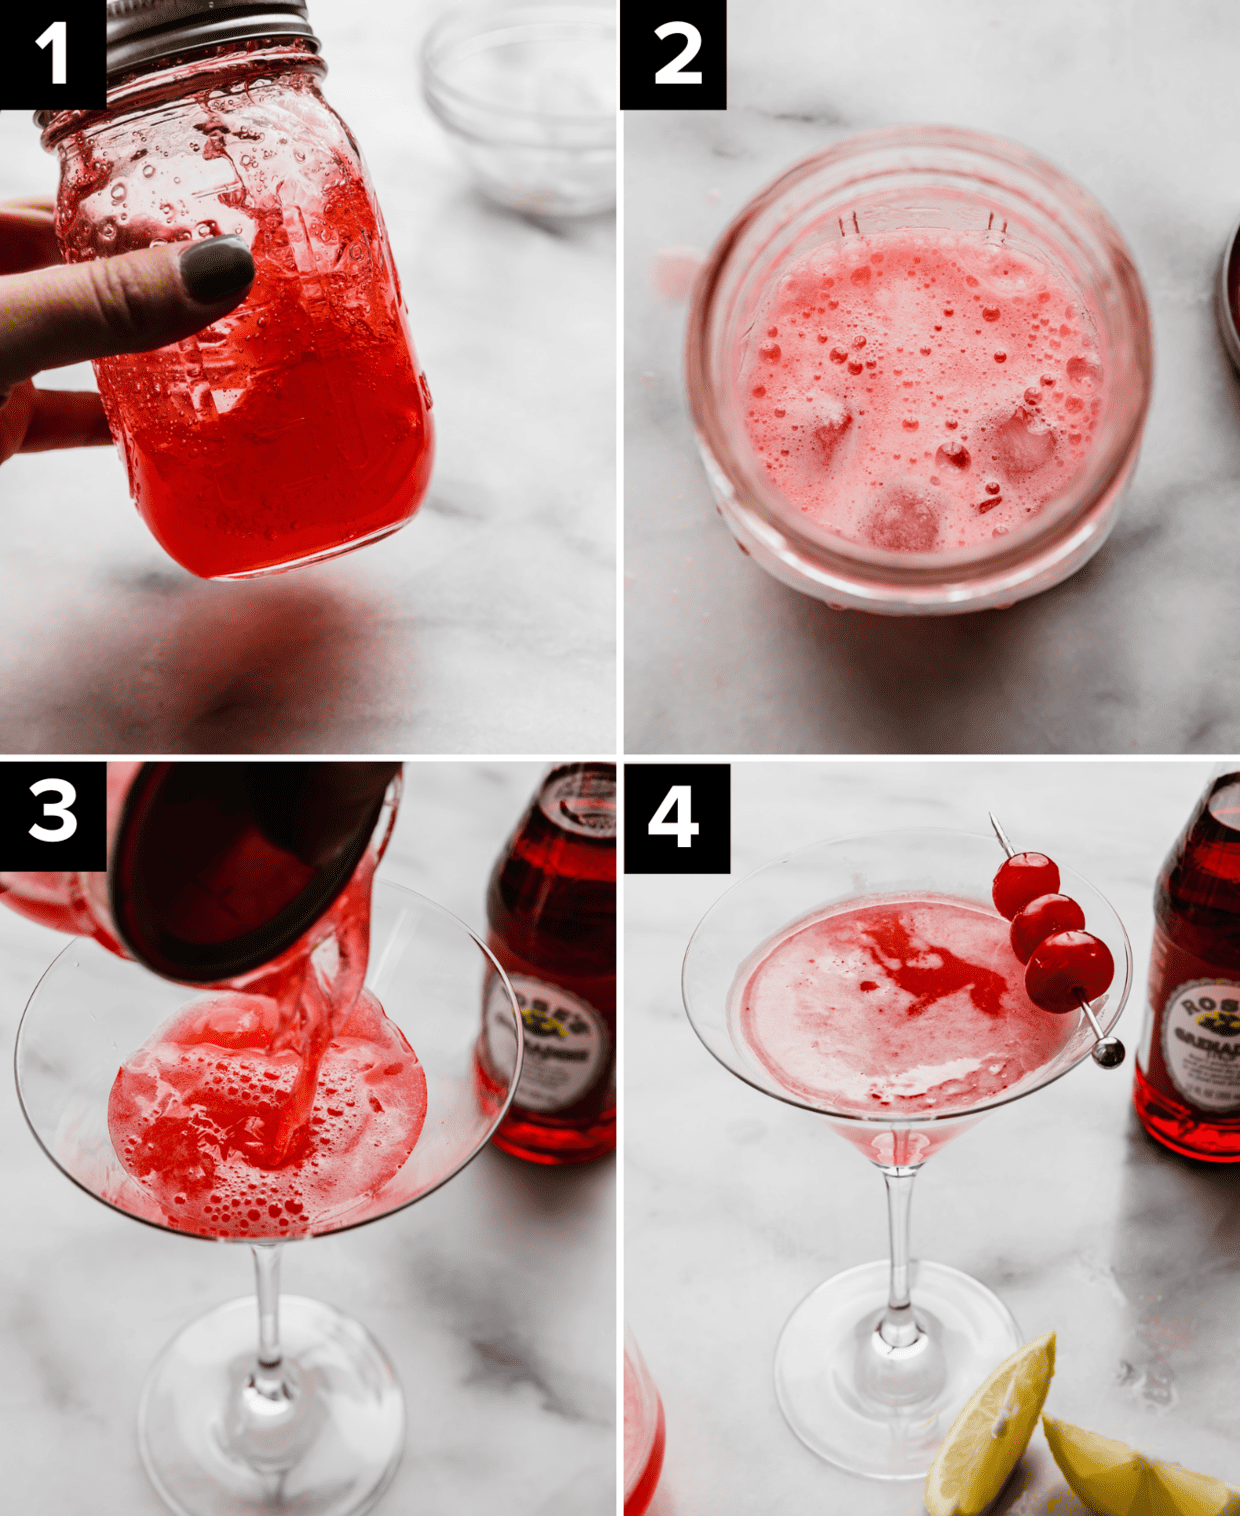 Four photos showing how to make a pink lady mocktail recipe, top left image is a glass mason jar filled with pink mocktail ingredients being shaked, top right is overhead photo of foamy Pink Lady Mocktail in a mason jar, bottom left image is Pink Lady Mocktail being poured into a glass, and bottom right photo is Pink Lady Mocktail in a martini glass.